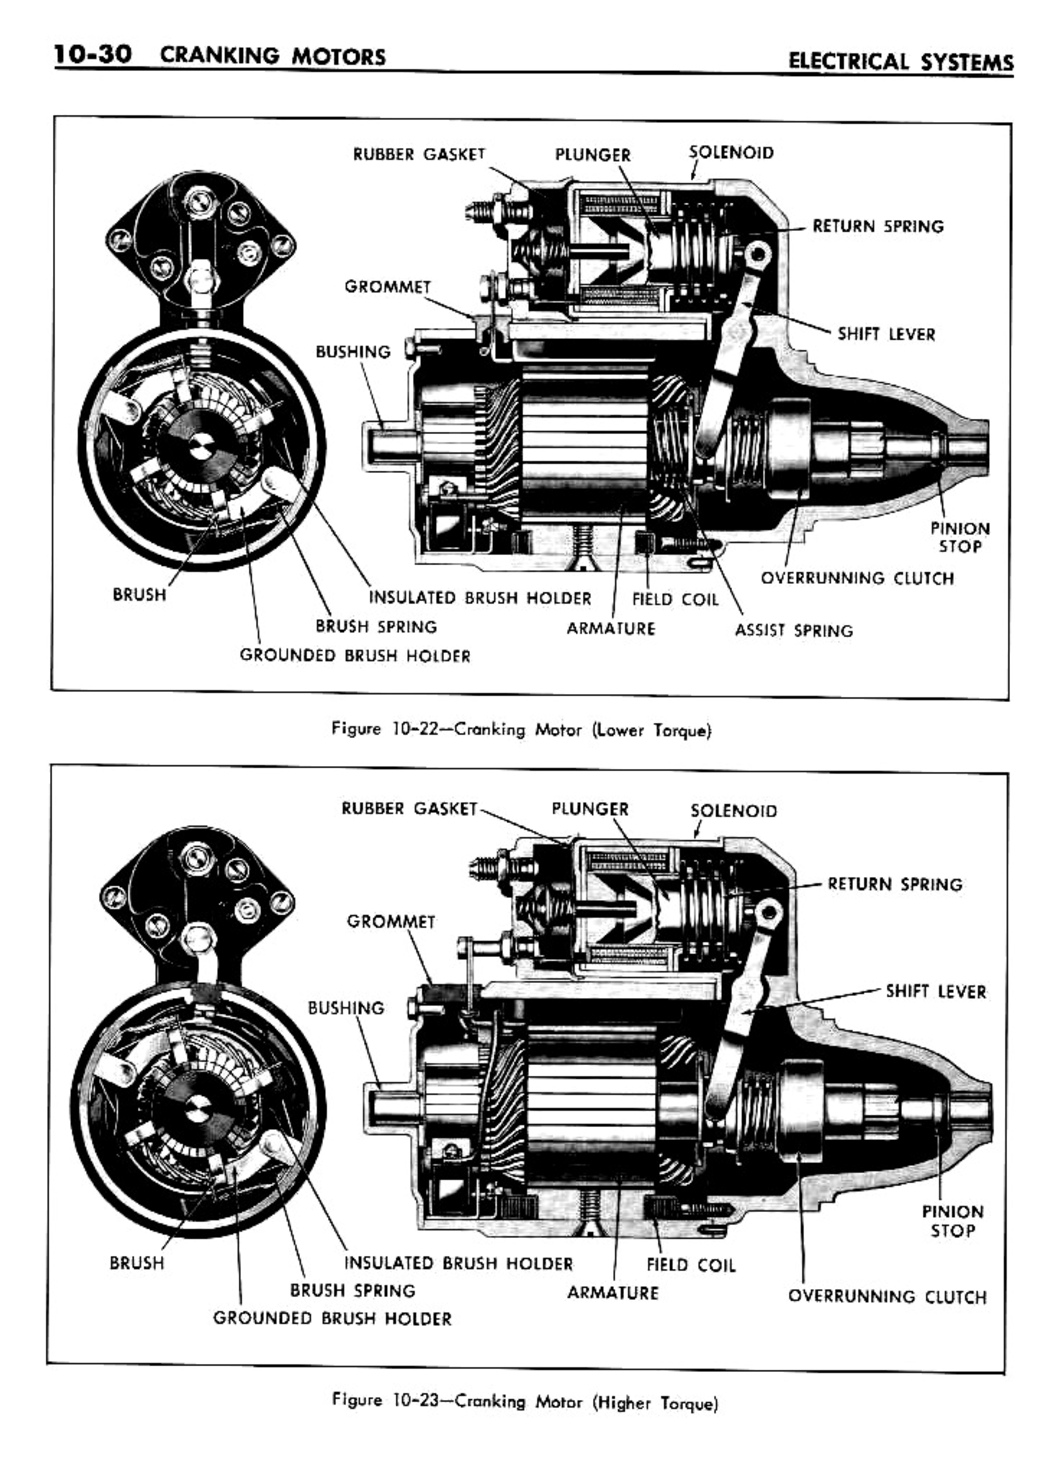 n_10 1961 Buick Shop Manual - Electrical Systems-030-030.jpg